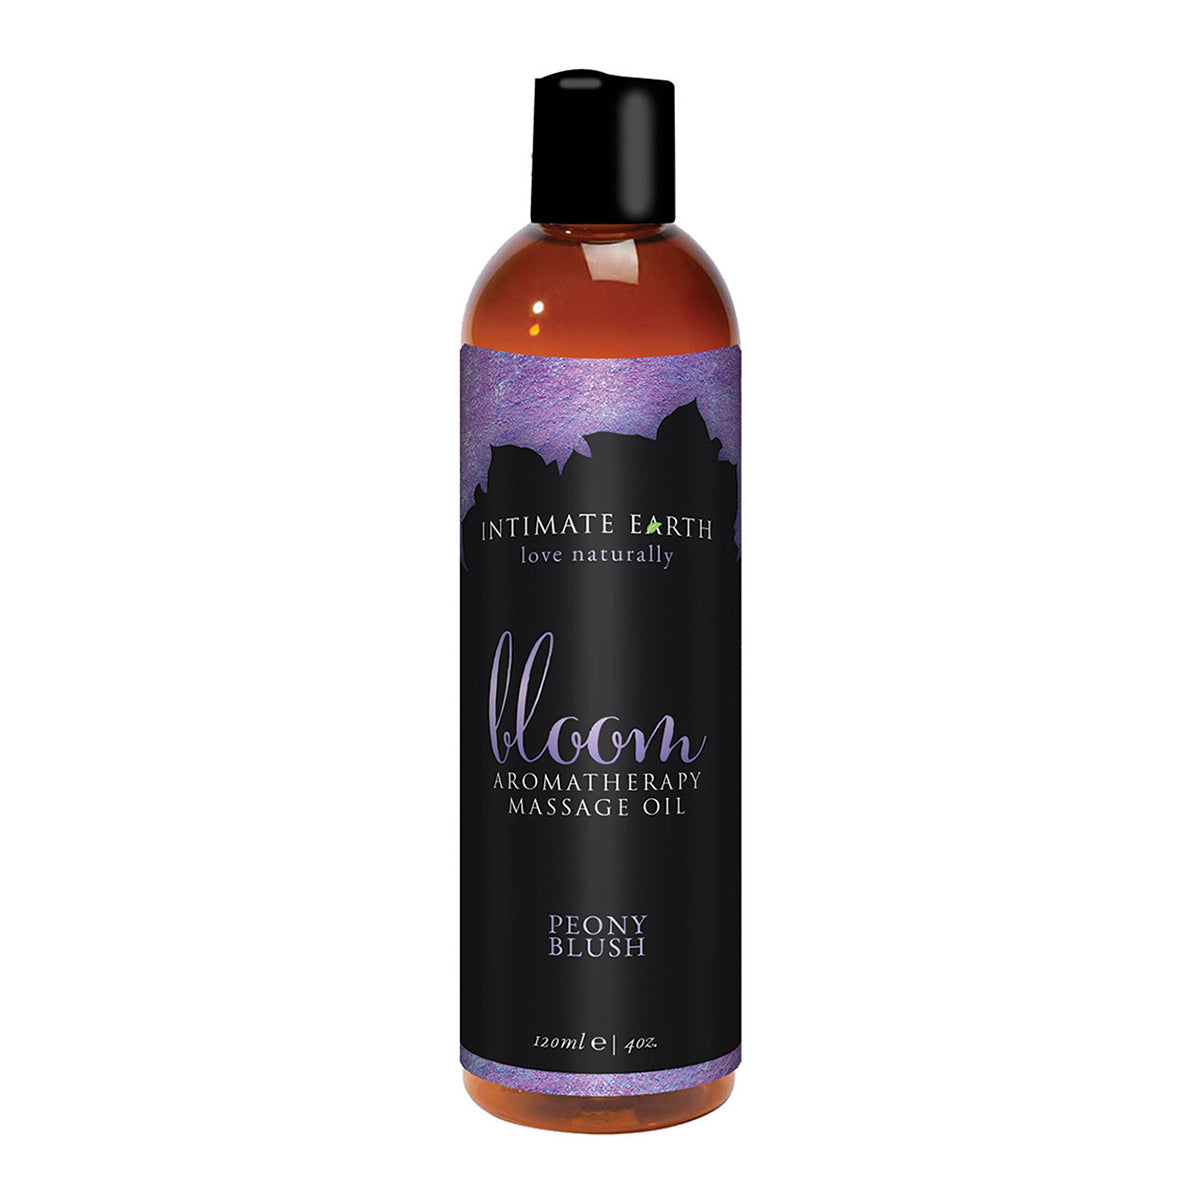 Intimate Earth Aromatherapy Massage Oil - Bloom 4oz